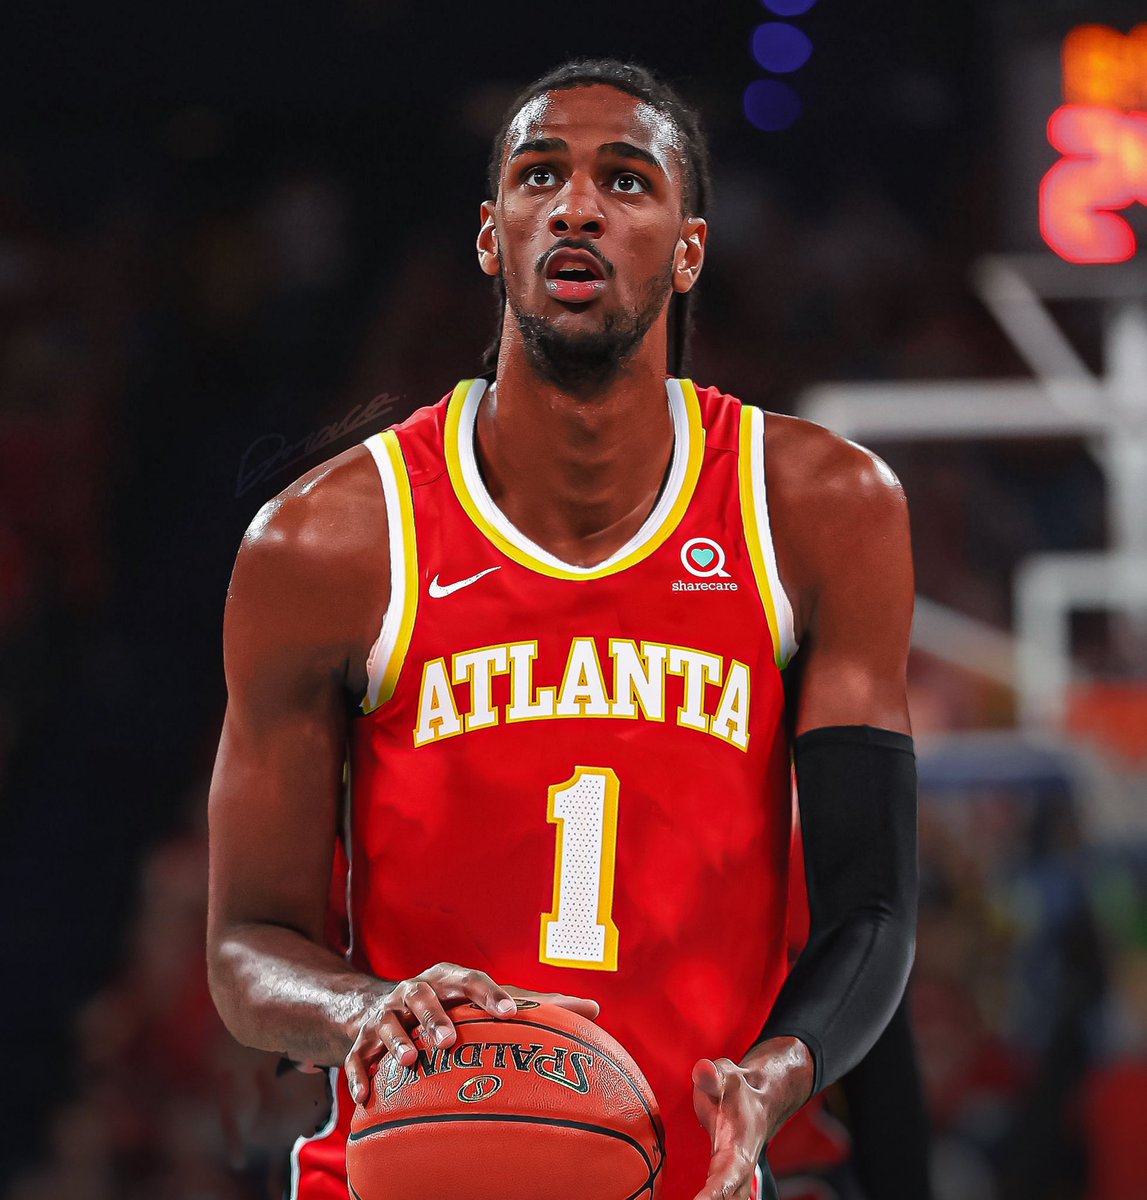 I guess a dream can come true… even for the @ATLHawks